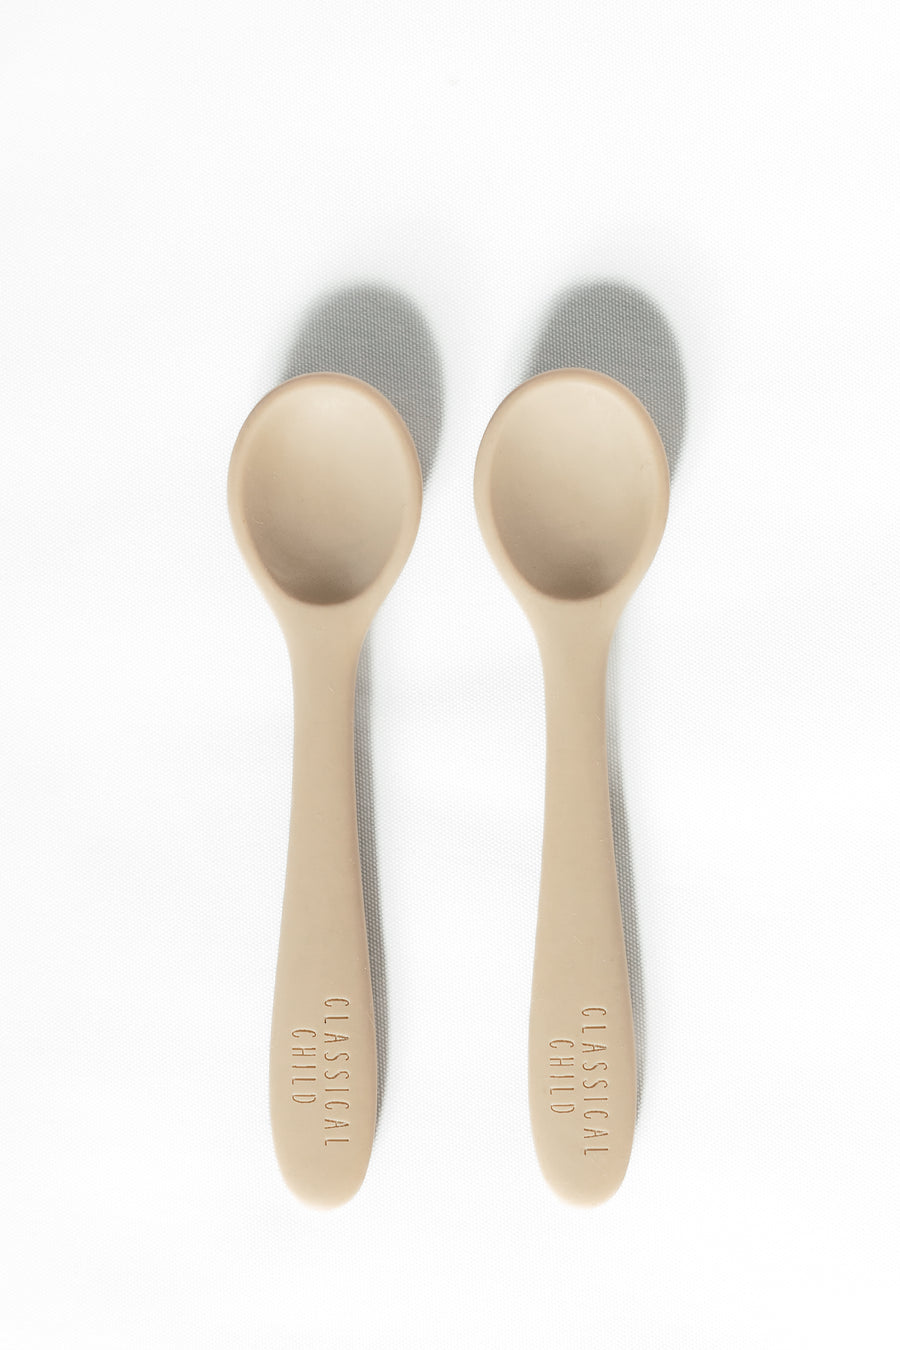 Linen Silicone Spoon 2 Pack